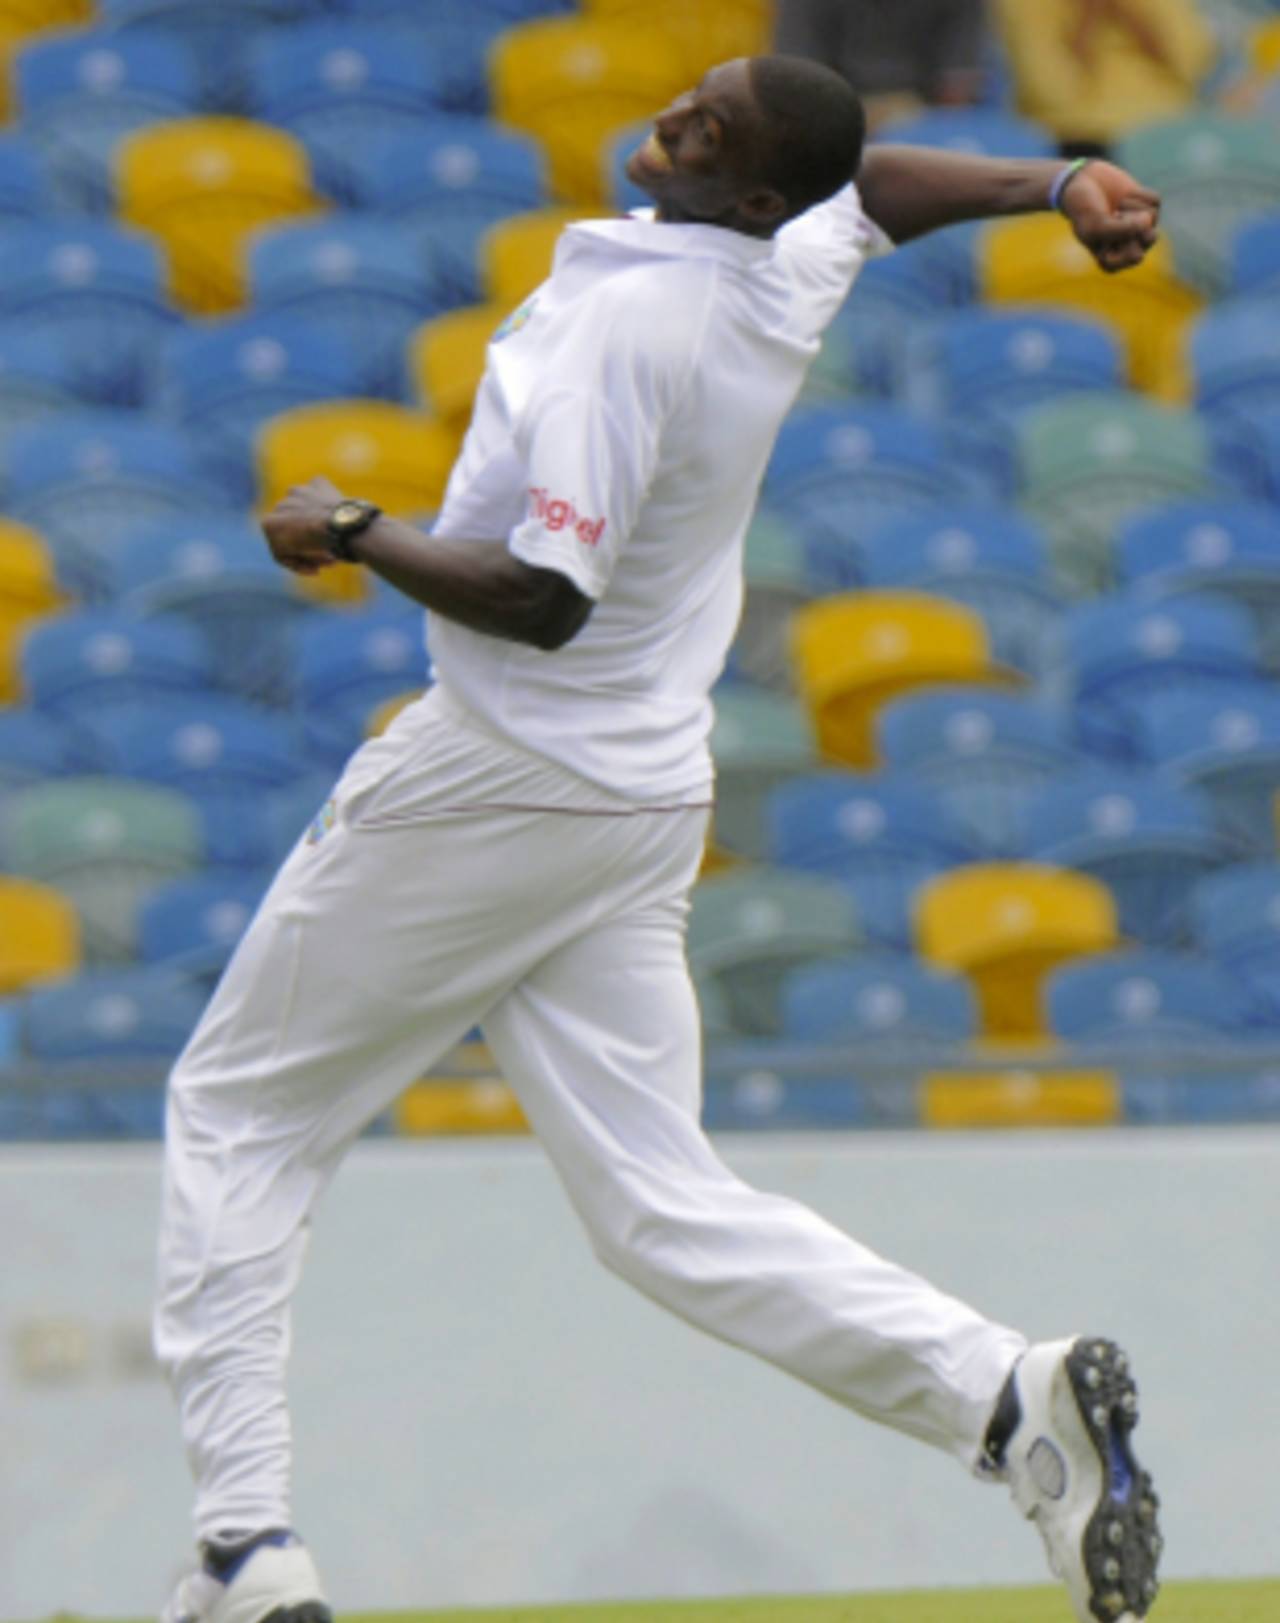 Jason Holder: "There are some bowlers and allrounders ahead of me [for West Indies selection], but I'm prepared to put in the [required] work."&nbsp;&nbsp;&bull;&nbsp;&nbsp;WICB